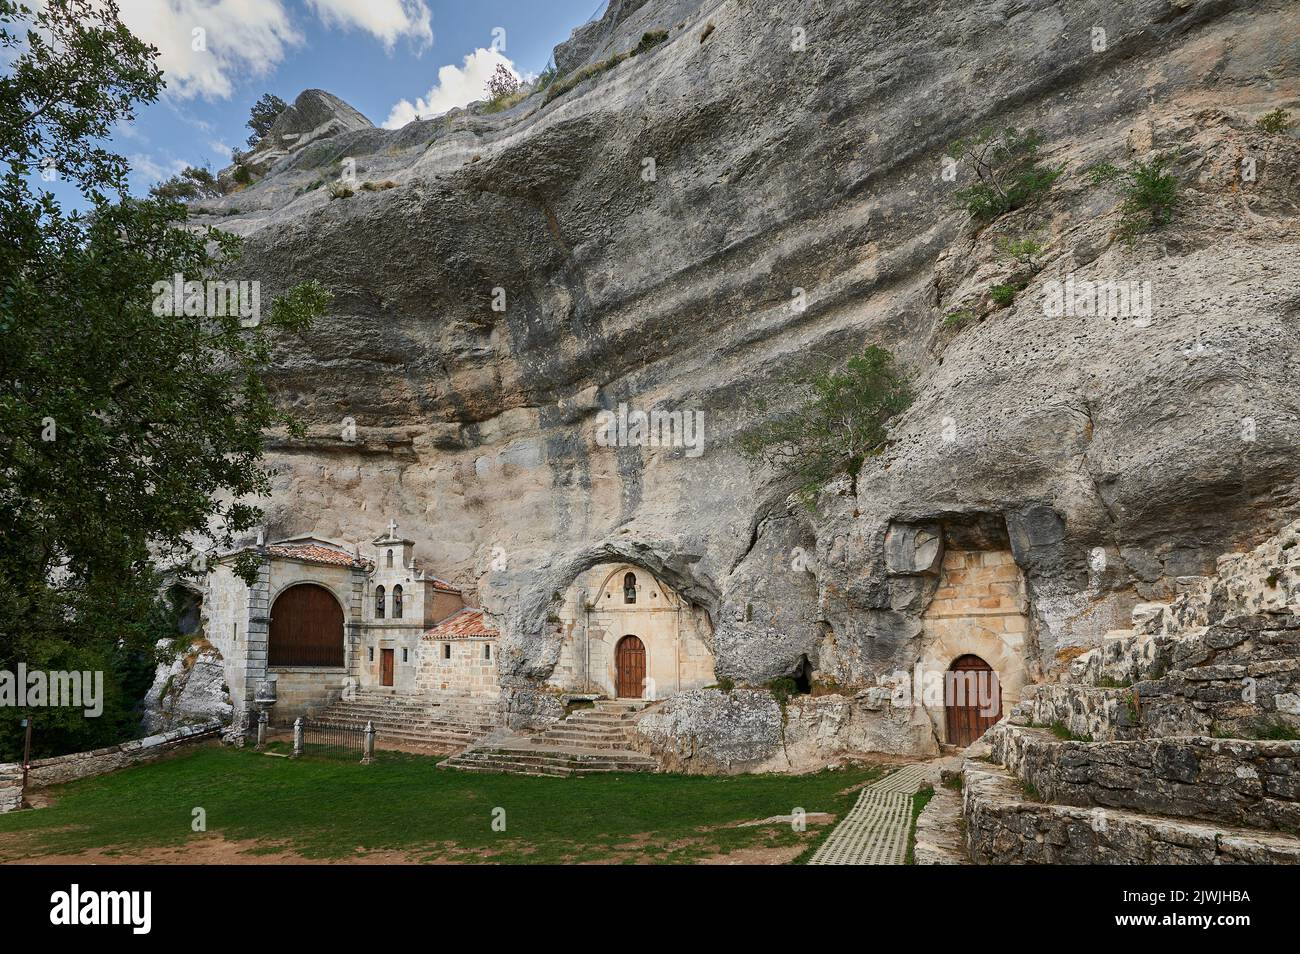 Hermitage of San Bernabe in the Ojo Guareña Karstic complex, National Monument in Castilla León, Spain, Europe Stock Photo